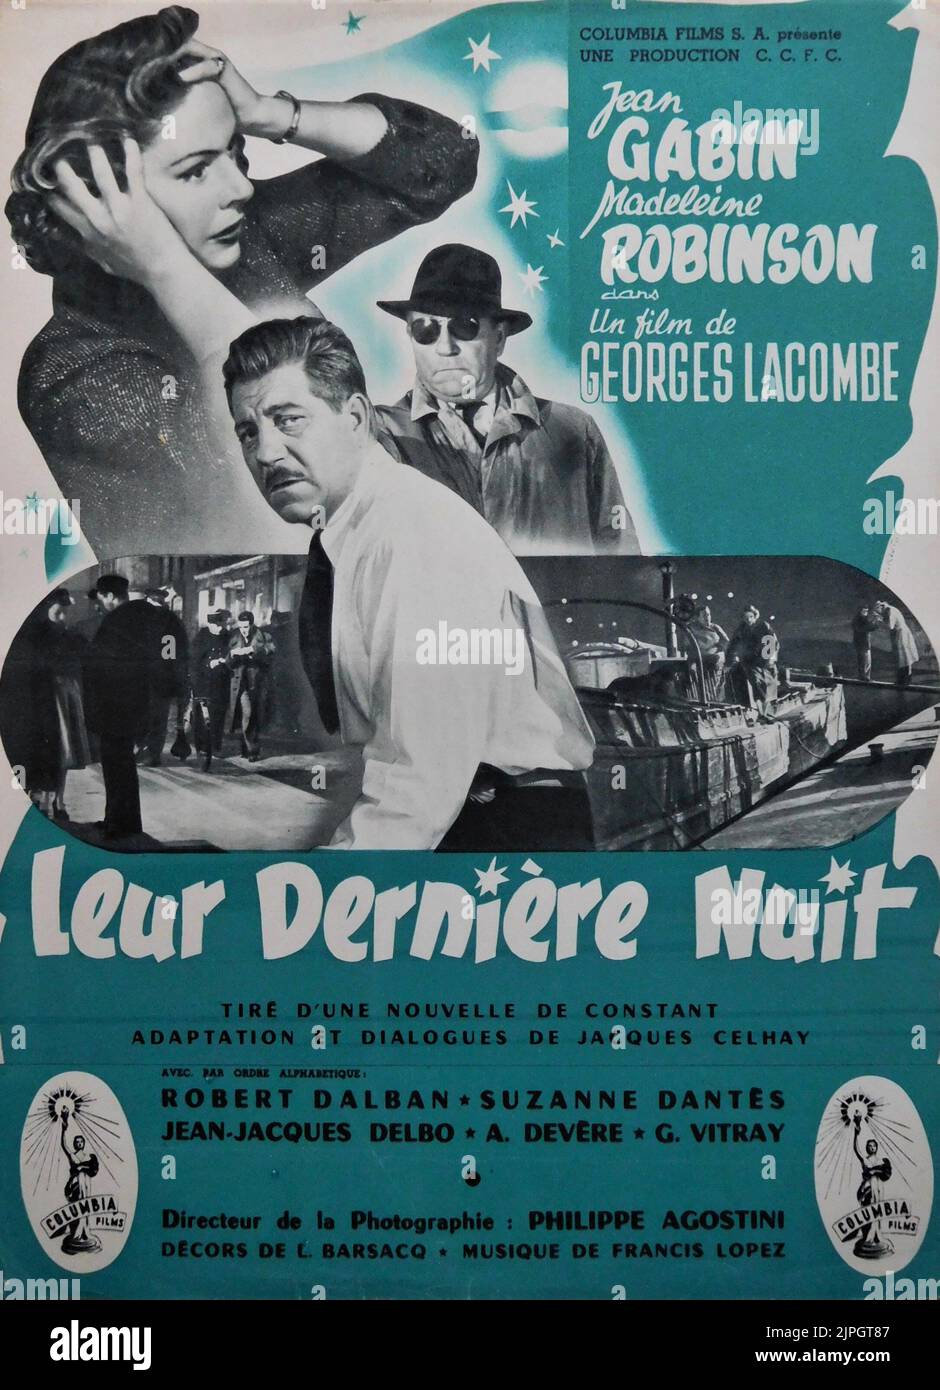 JEAN GABIN and MADELEINE ROBINSON in LEUR DERNIERE NUIT / THEIR LAST NIGHT 1953 director GEORGES LACOMBE Compagnie Commerciale Francaise Cinematographique (CCFC) / Columbia Films Stock Photo